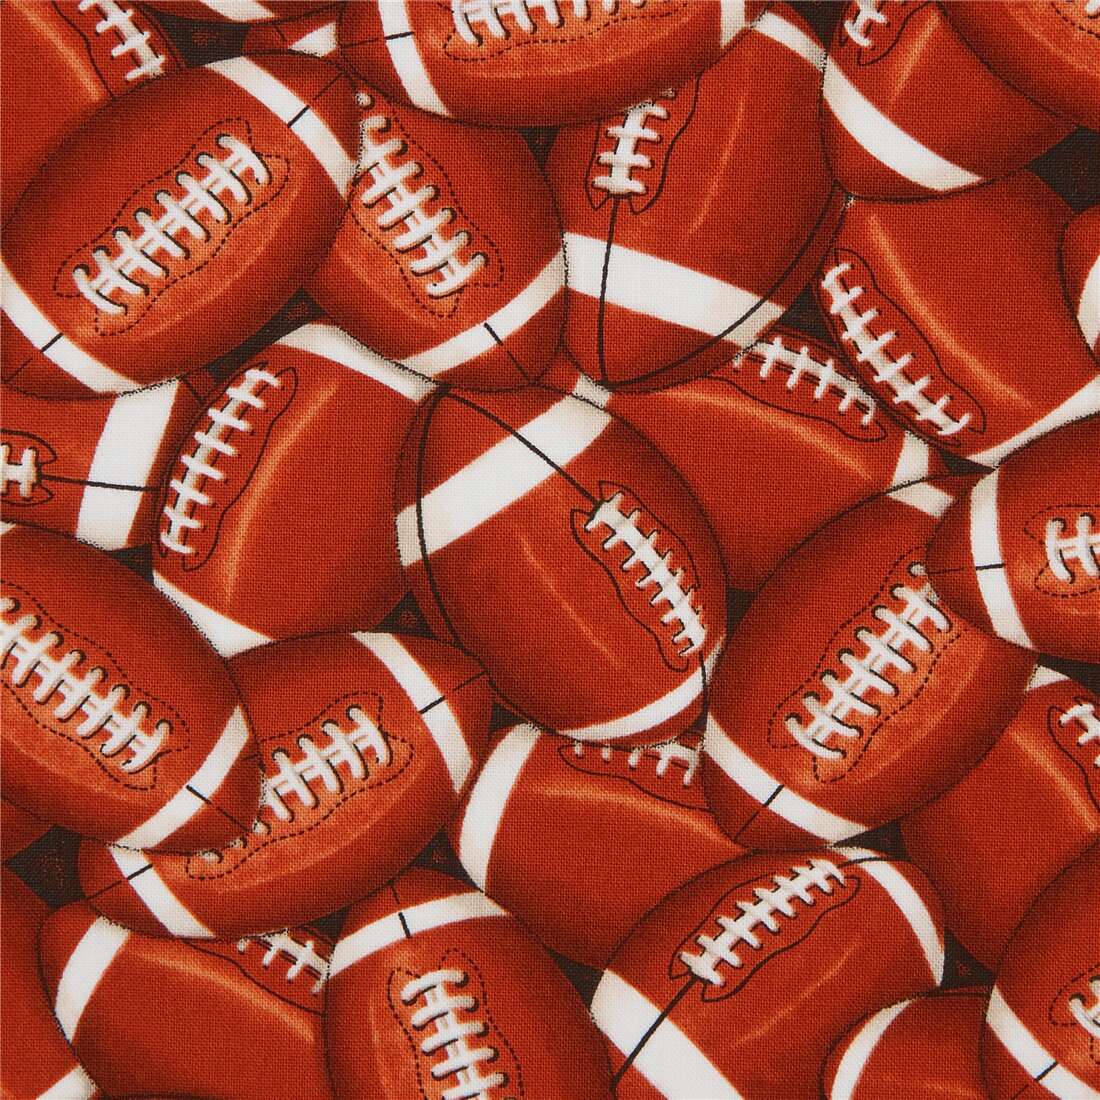 American football sport fabric by Timeless Treasures - modeS4u